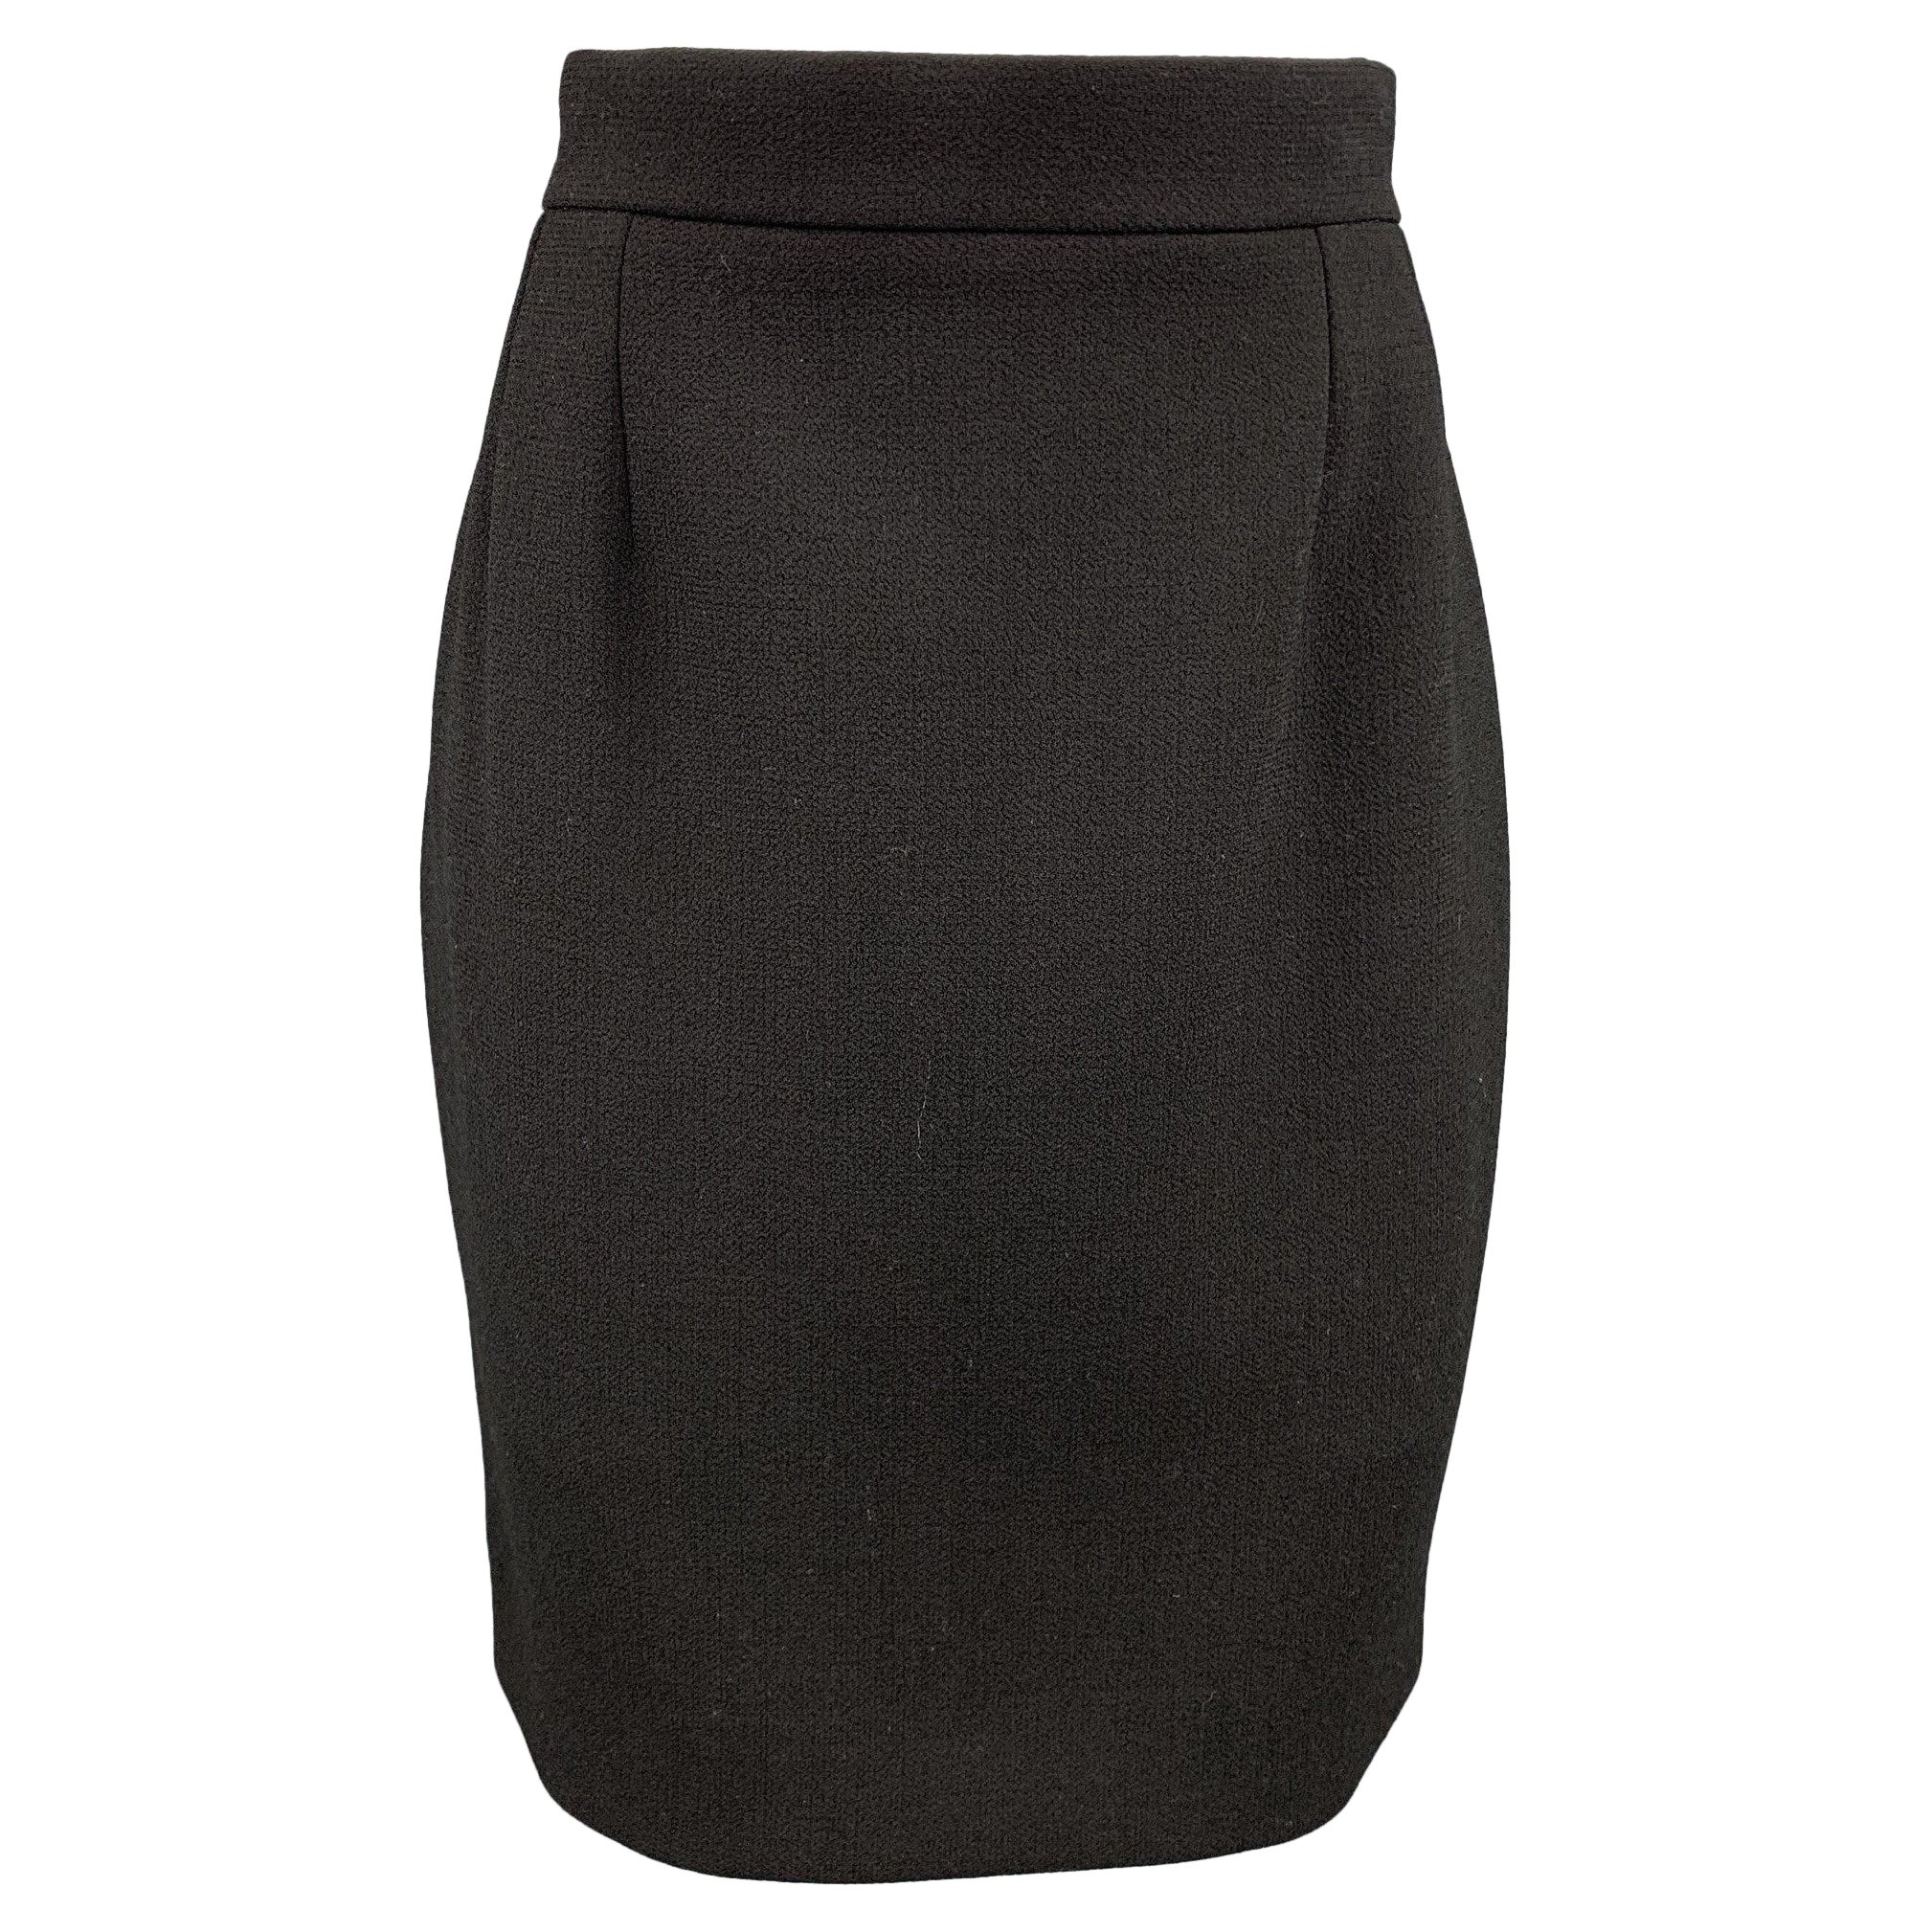 CHANEL Size 10 Black Crepe Wool Pencil Skirt For Sale